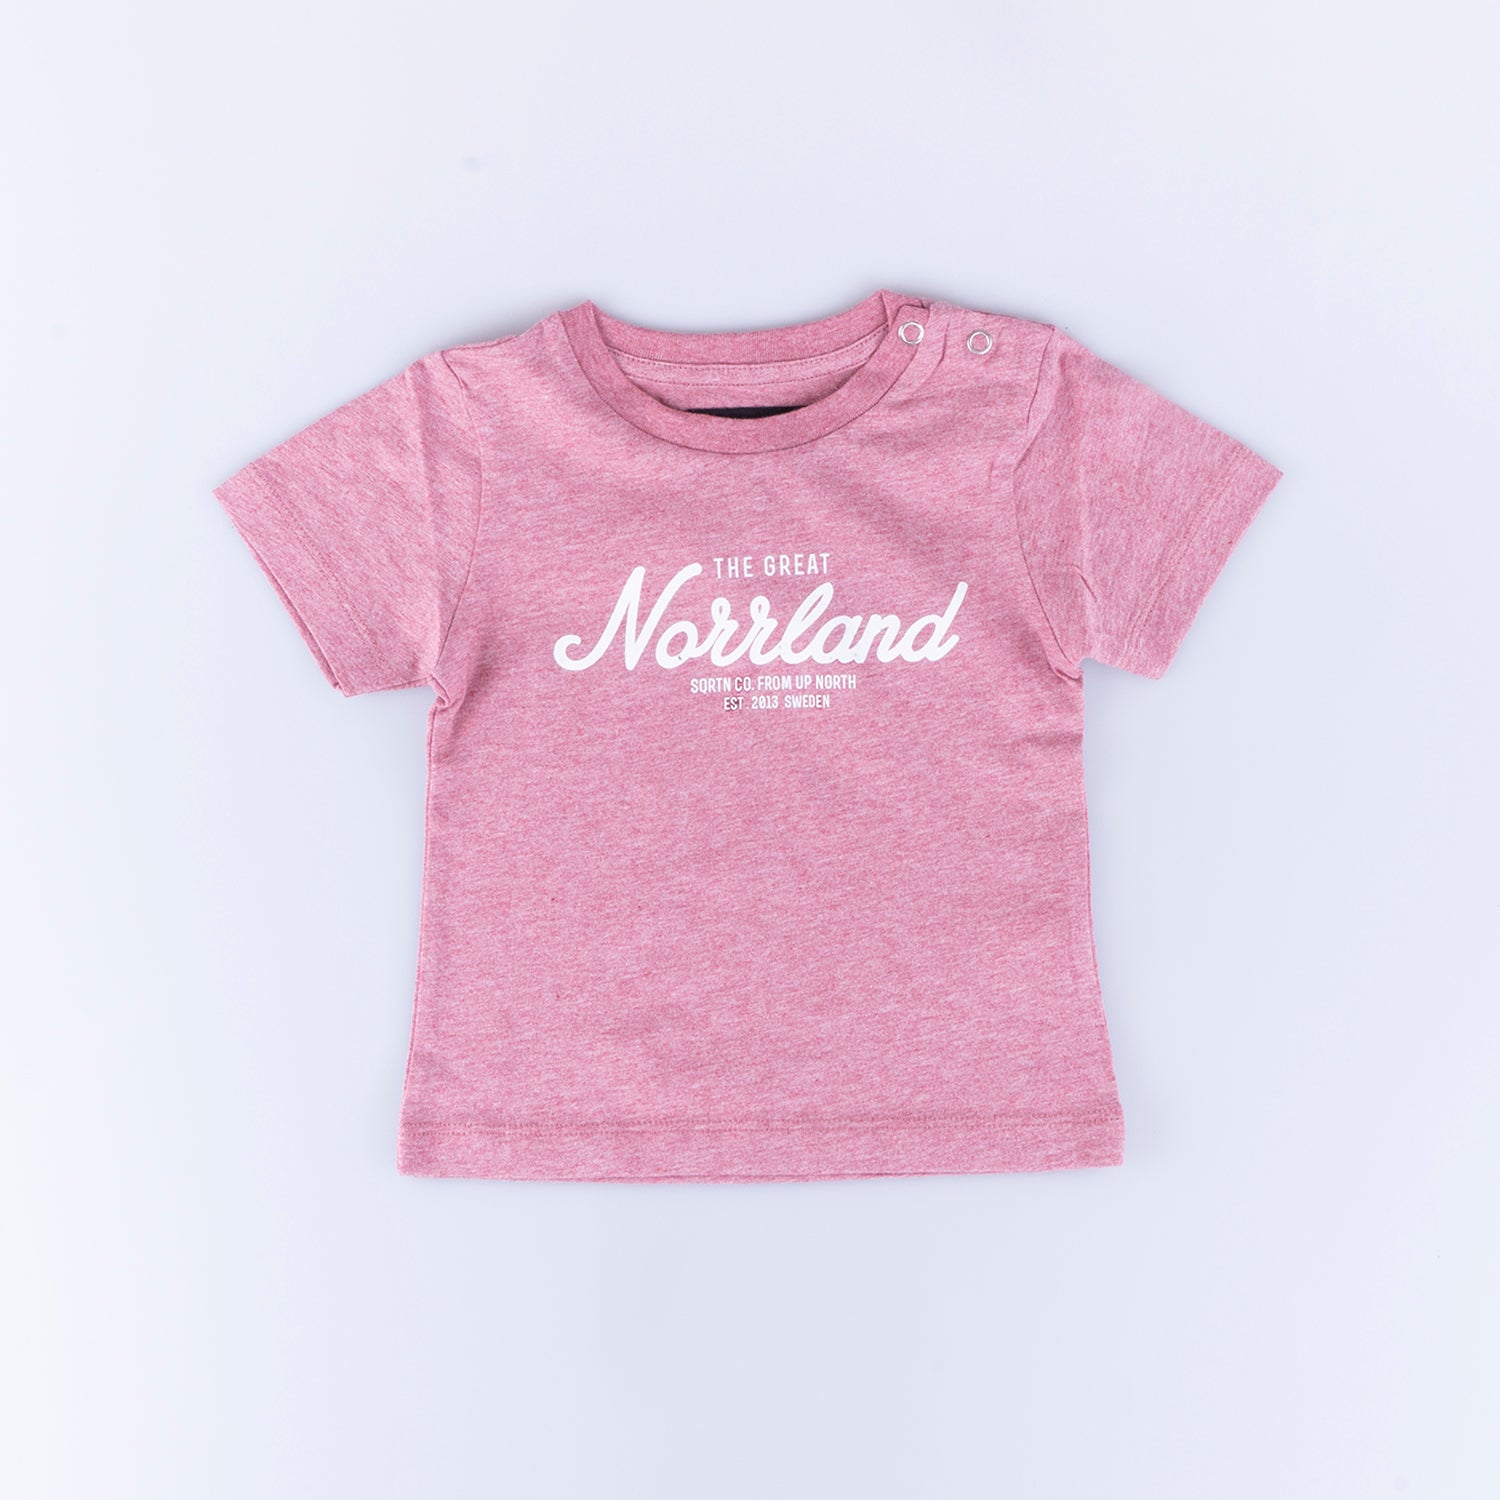 GREAT NORRLAND KIDS T-SHIRT - PINK